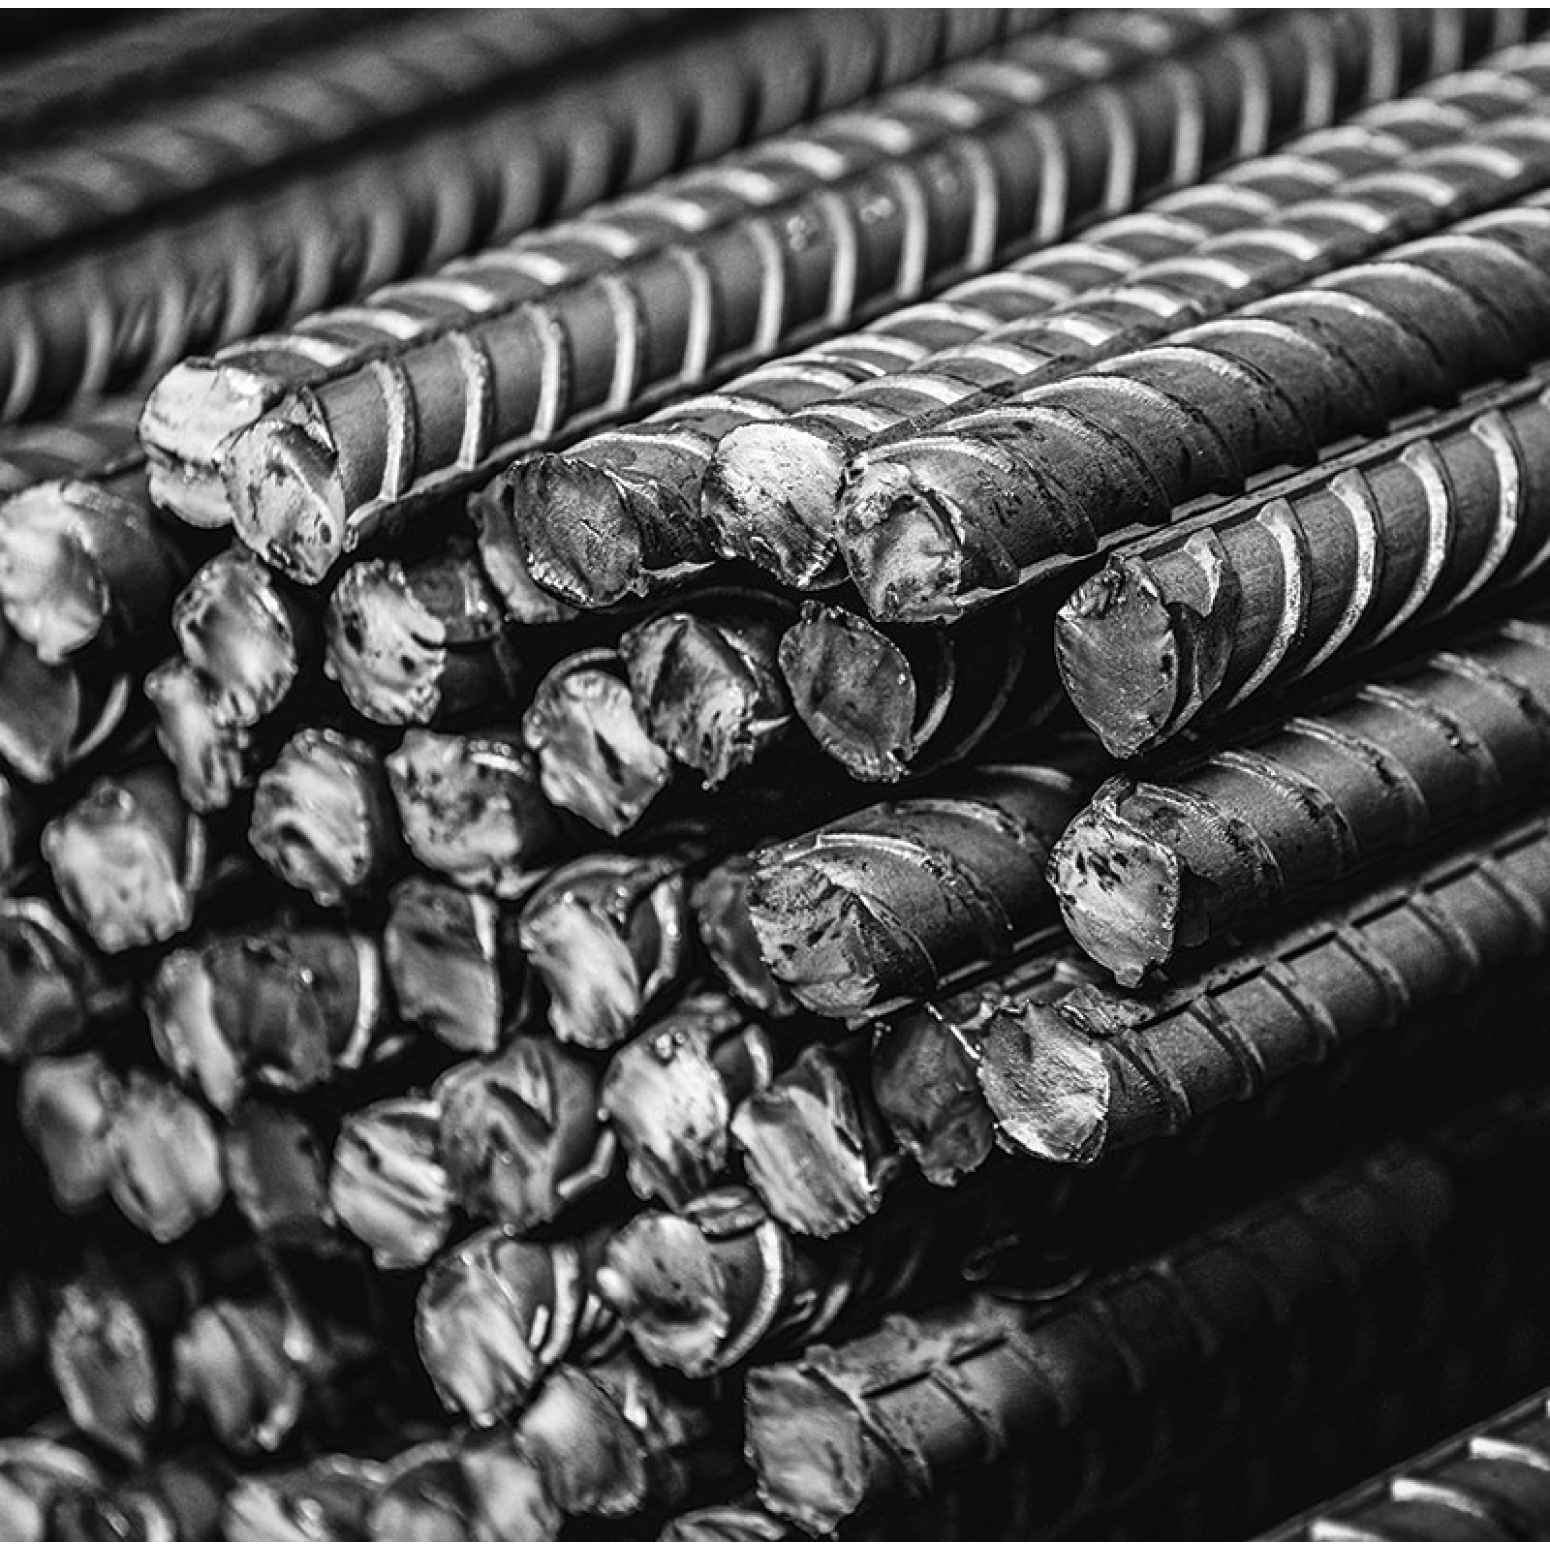 Deformed Steel Bars TISI Standards assorted brands SD40T DB16 length 12m 18.936kg per pc price for 7 tons and up